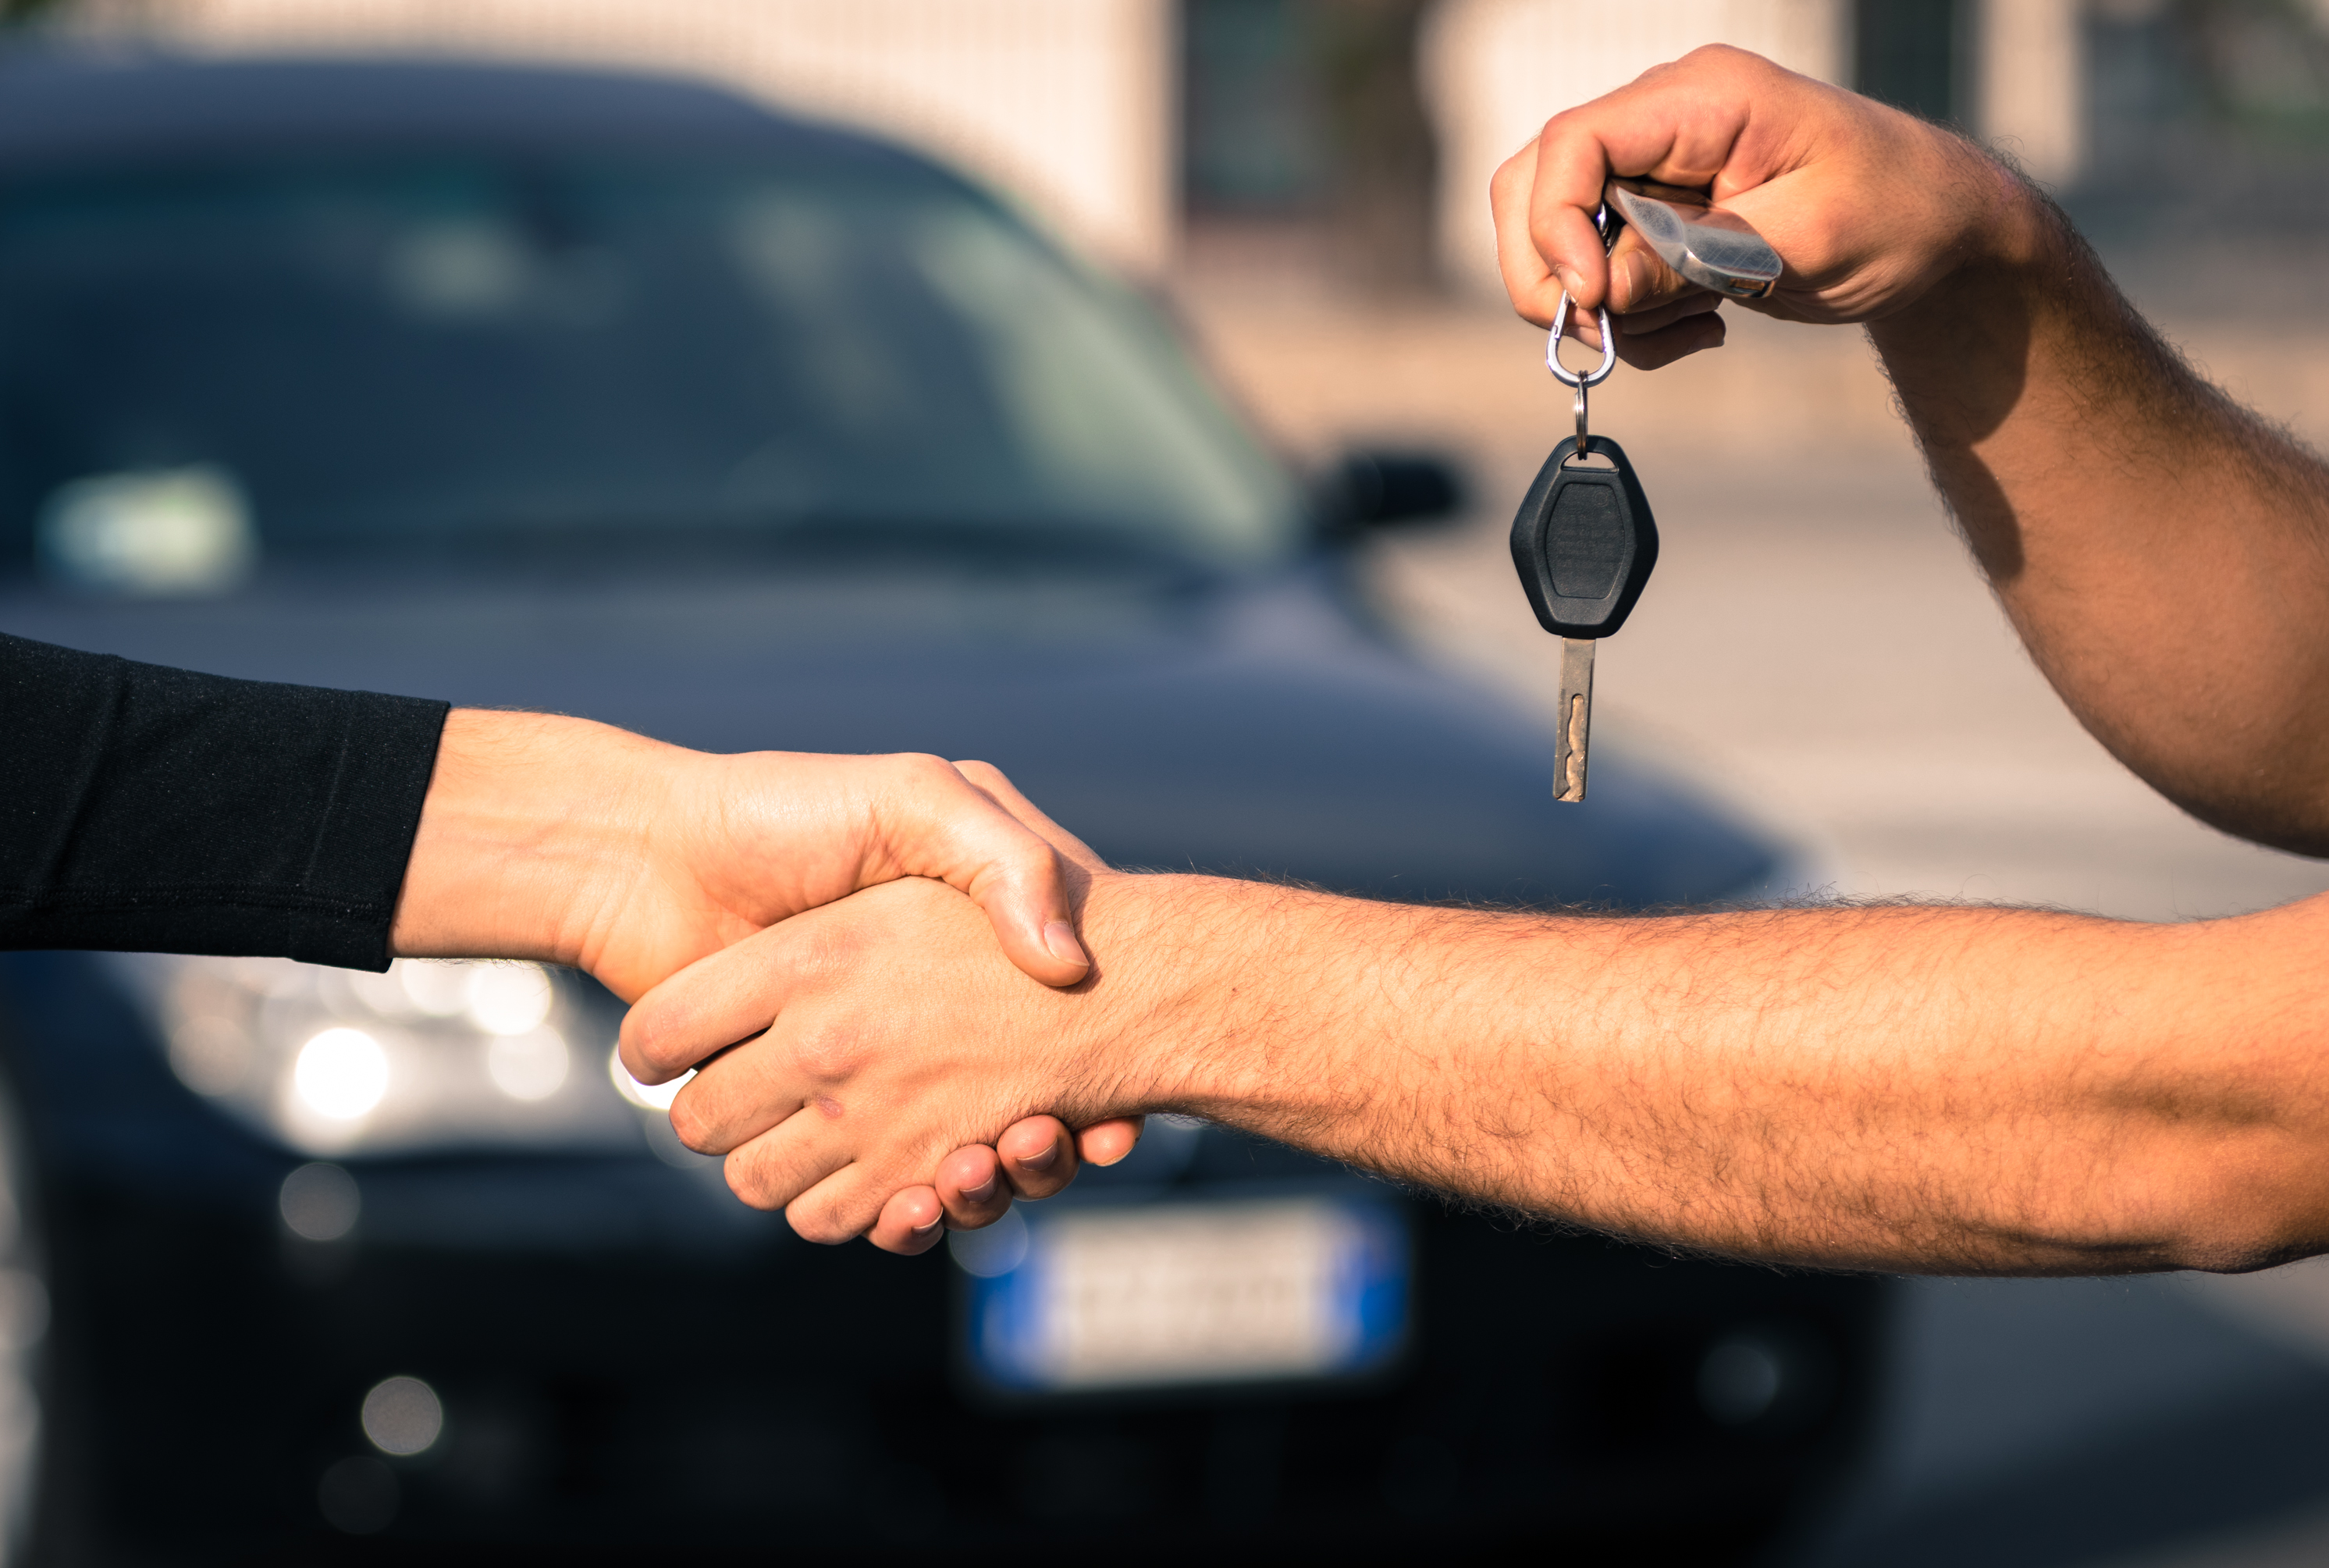 Picture of two people shaking hands. One person is holding a car key.